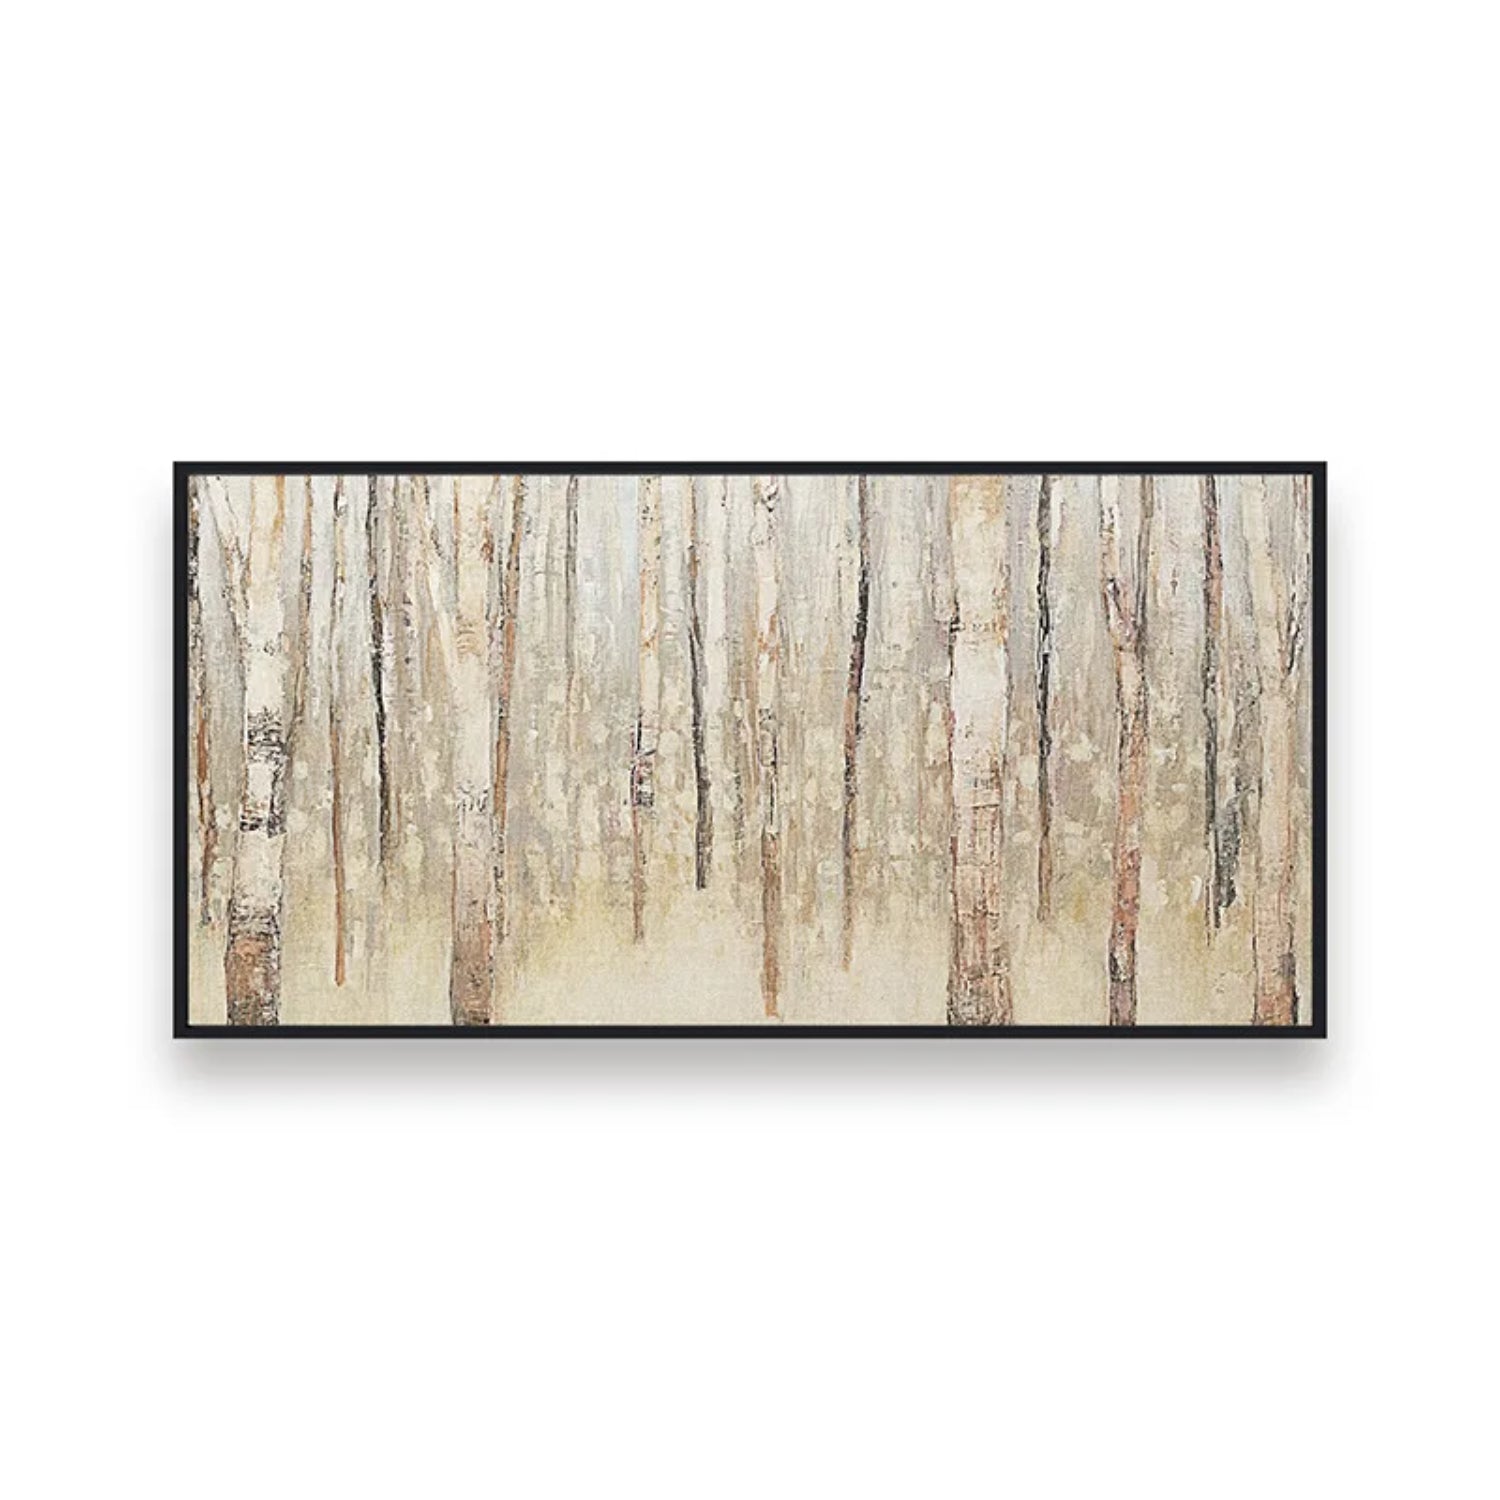 Abstract Birches in Winter Landscape Oil Painting